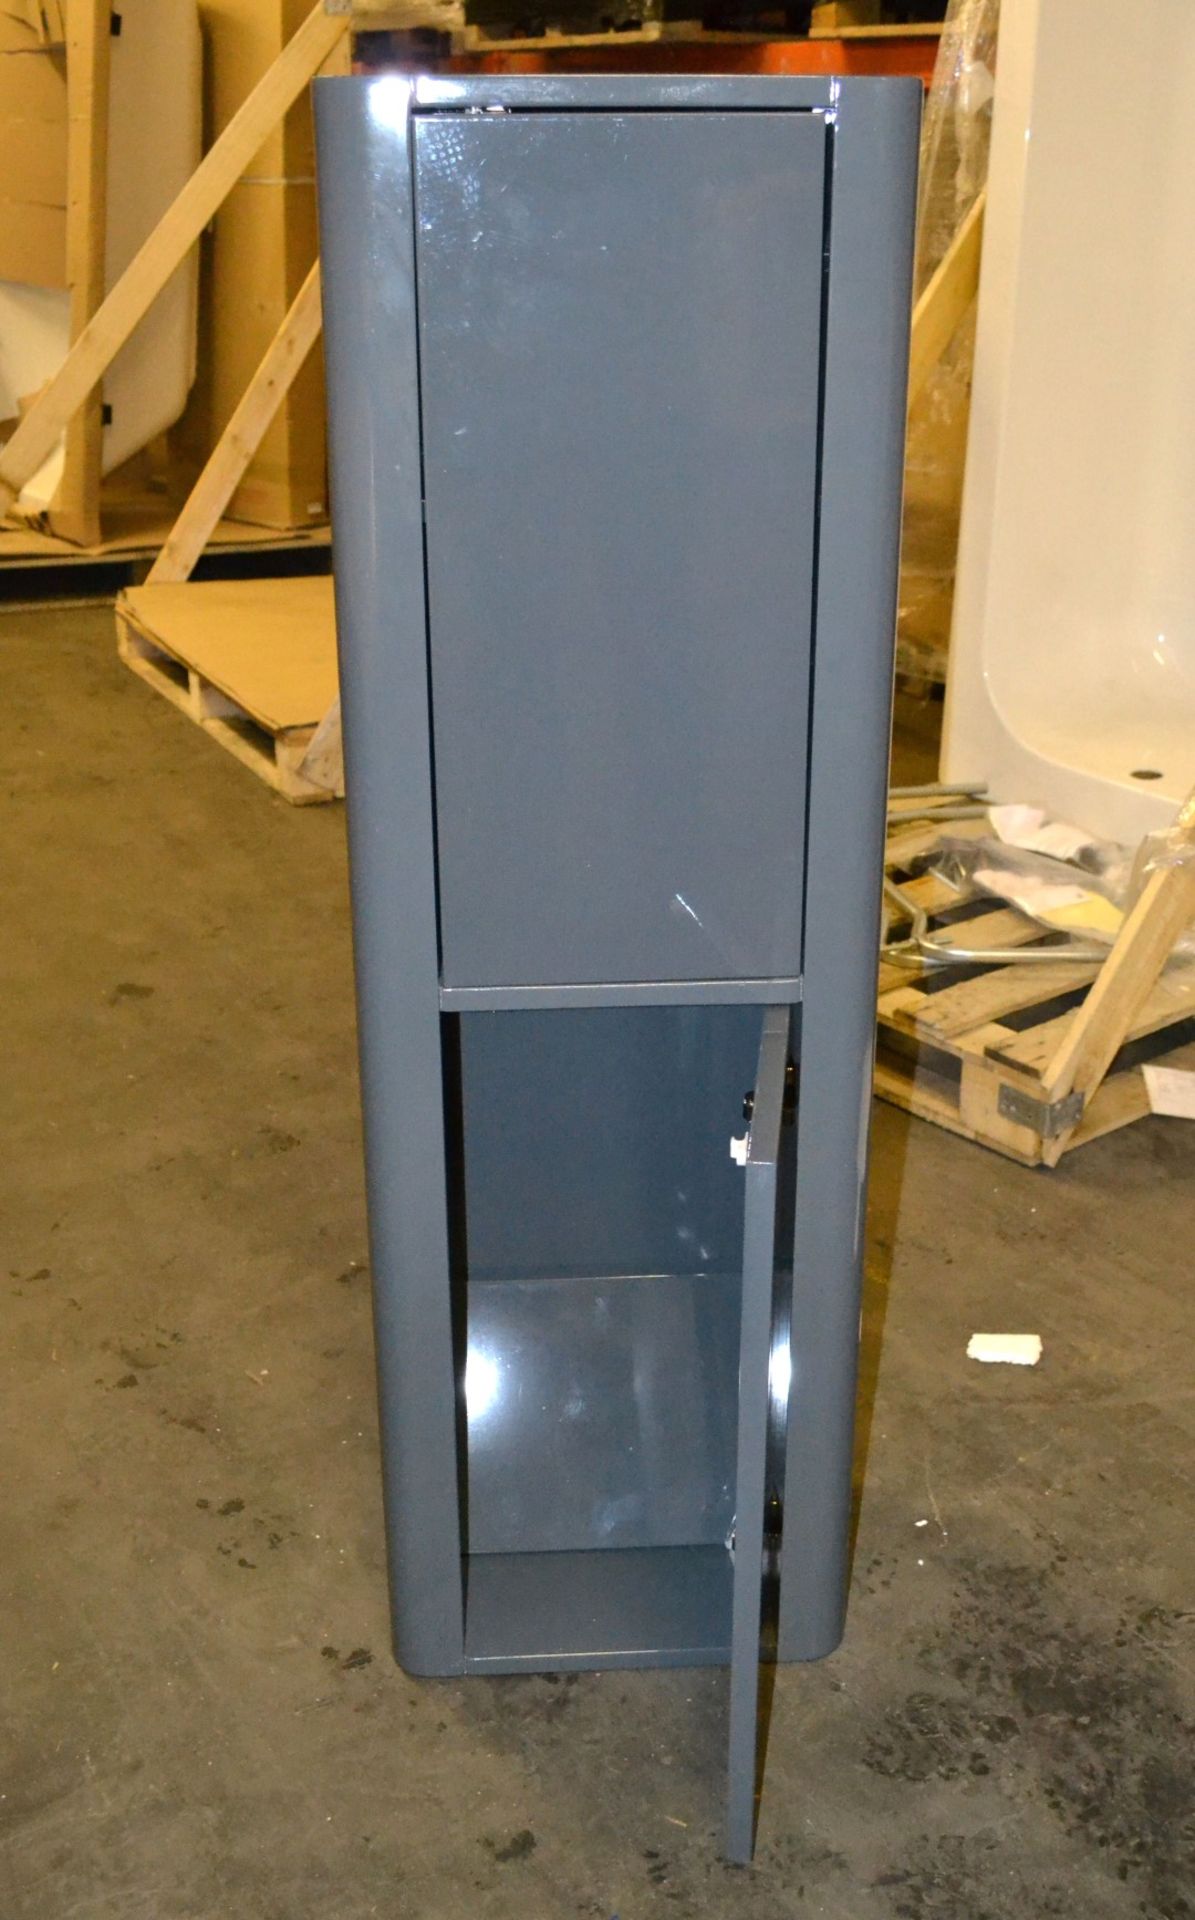 1 x Purity Pebble Grey Tall Wall Cabinet - Ref: DY148/SKY1001GR - CL190 - Unused Stock - Location: B - Image 7 of 9